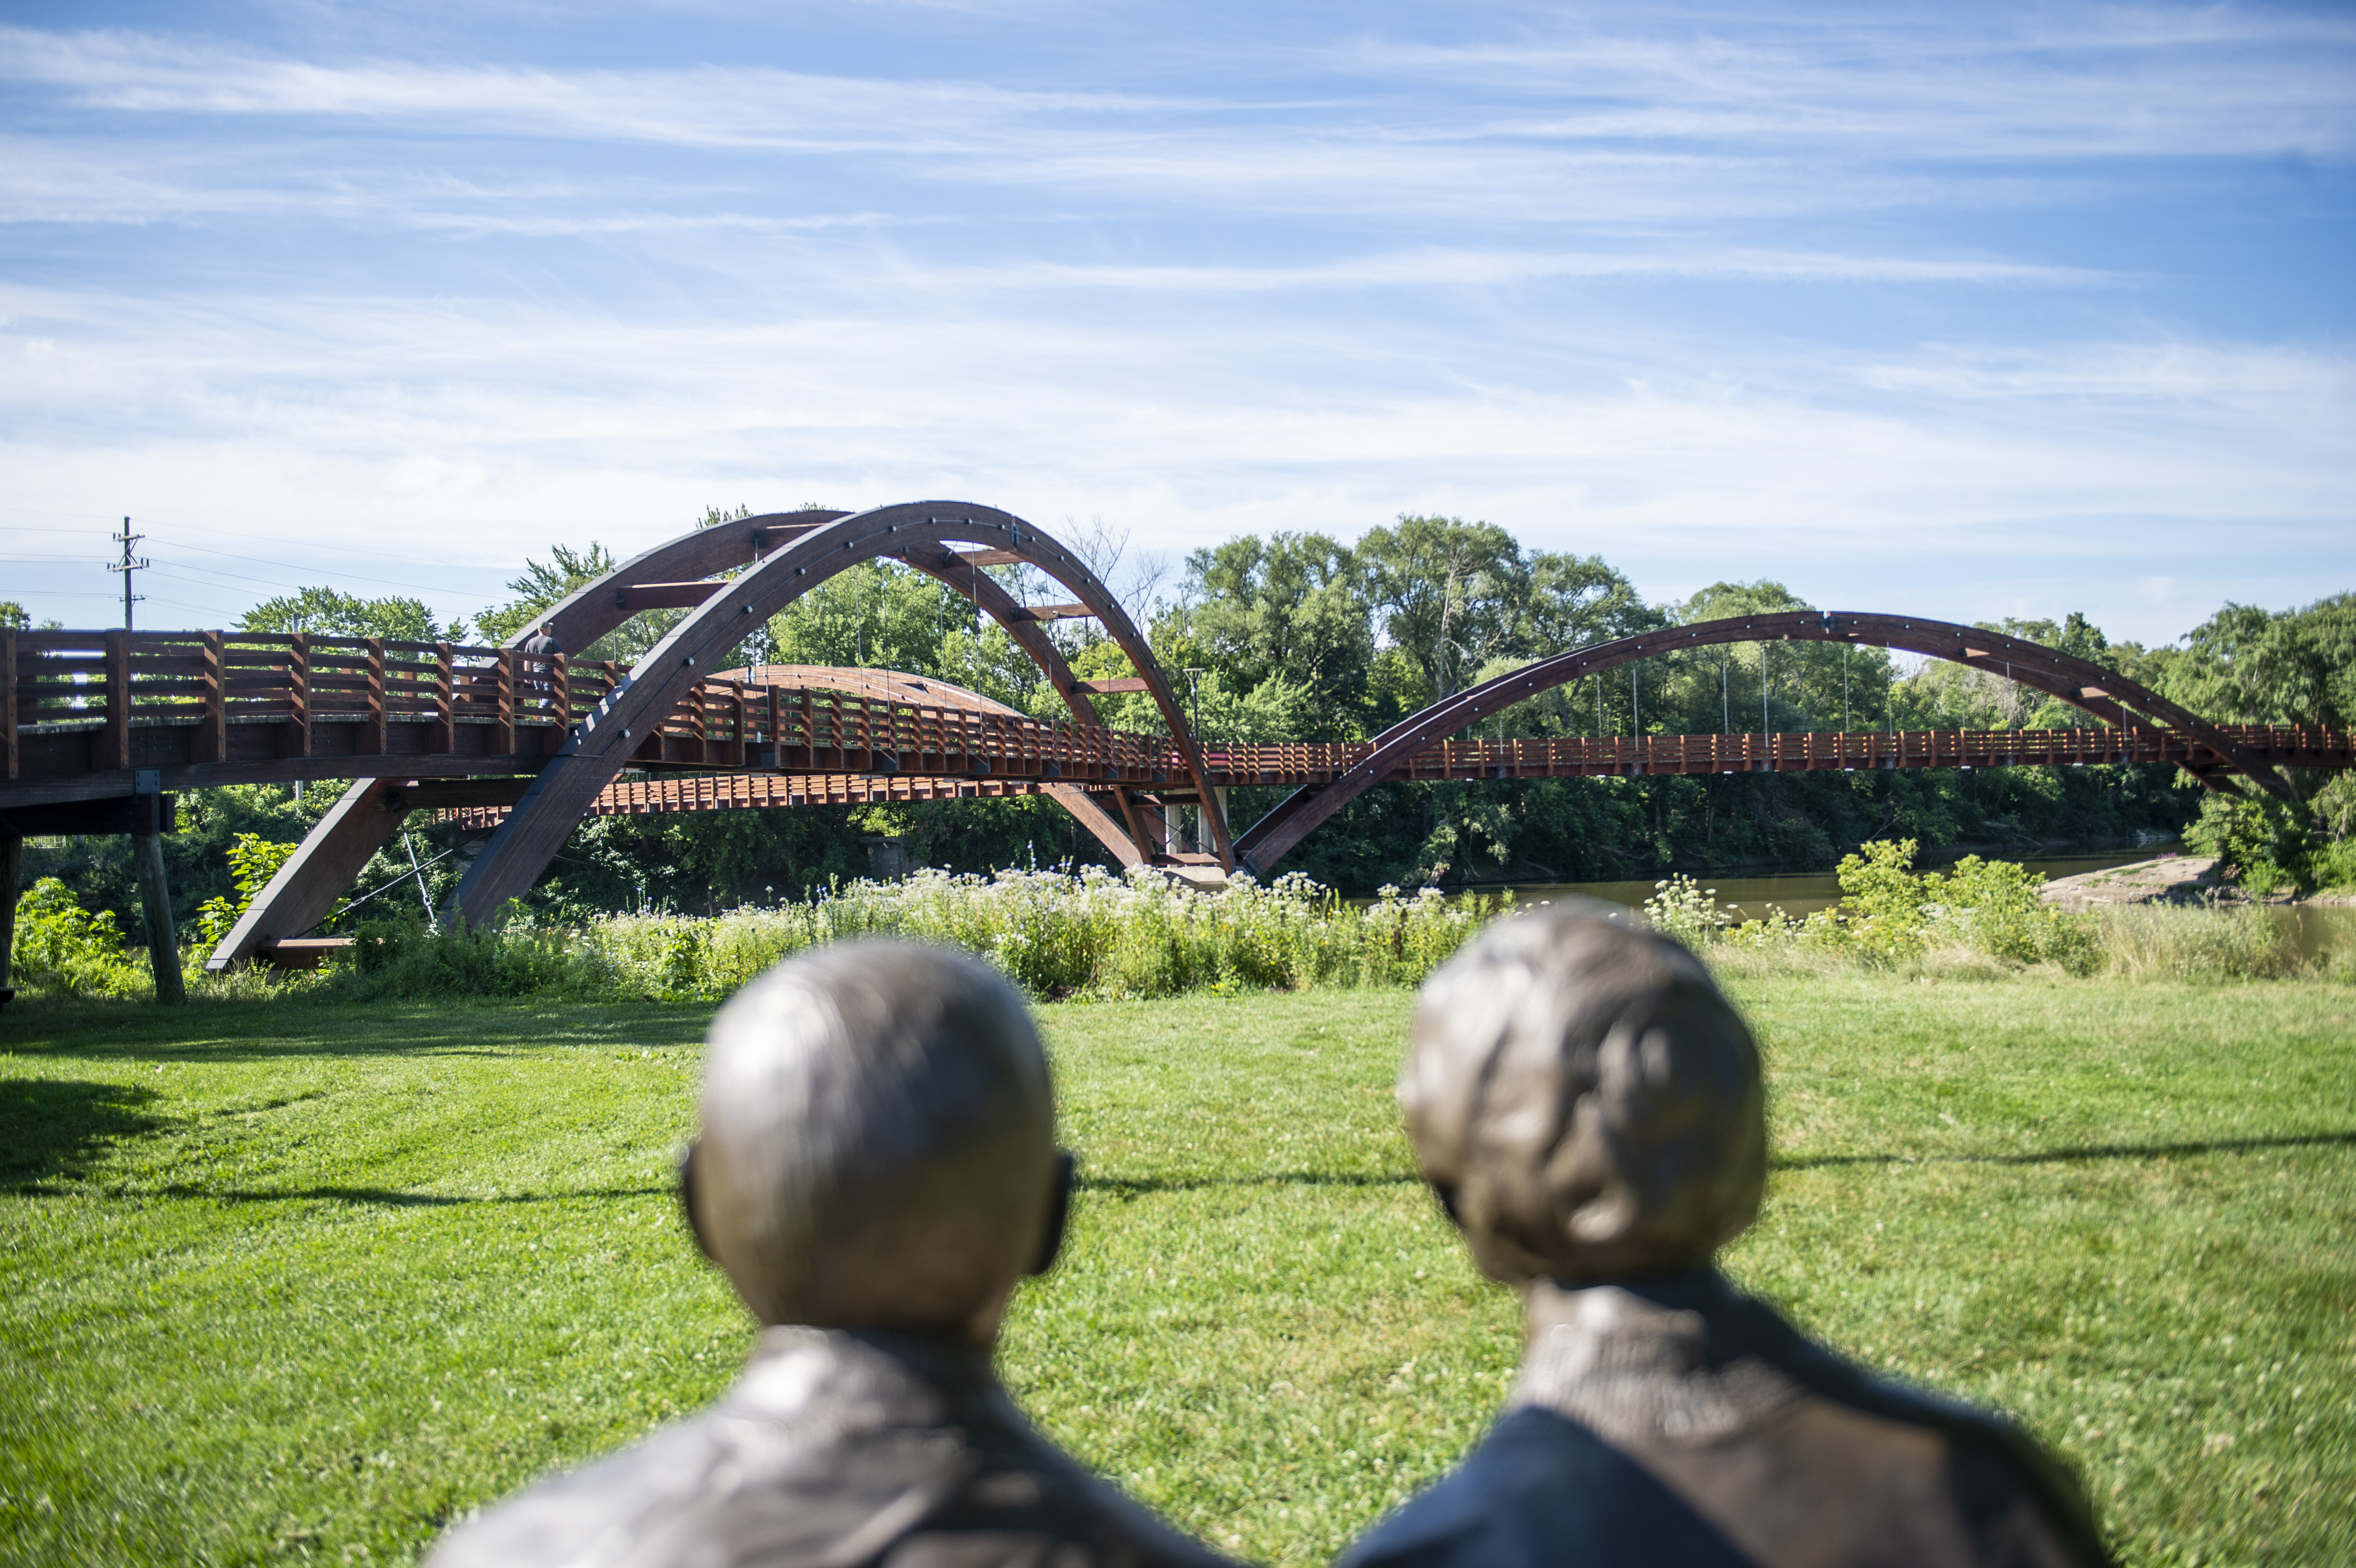 A view of the Tridge in Midland on Thursday, July 30, 2020. The devastating flood in May gushed over the majority of land in this area. (Kaytie Boomer | MLive.com)